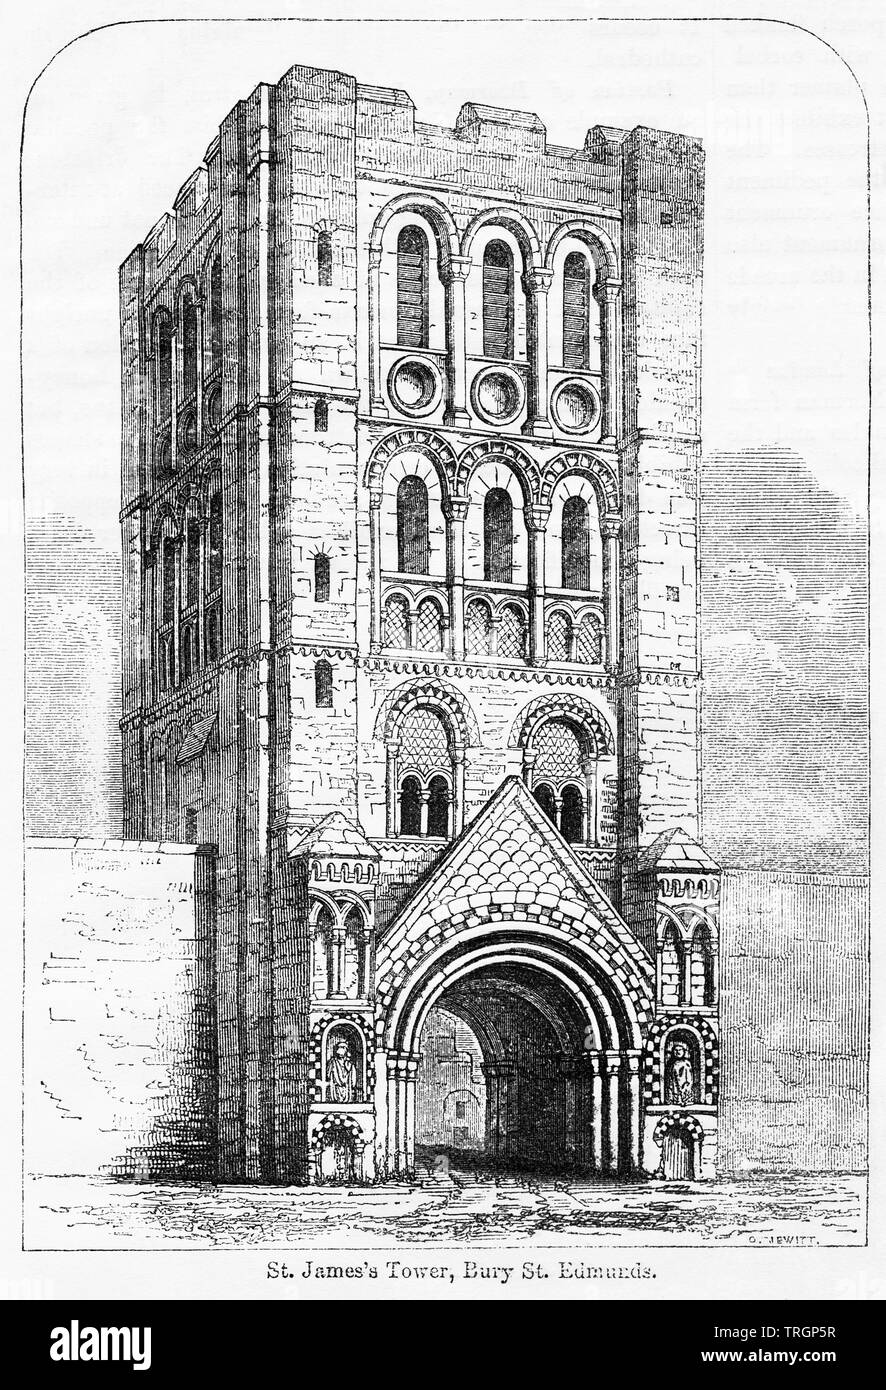 St. James’s Tower, Bury St. Edmunds, Illustration from John Cassell's Illustrated History of England, Vol. I from the earliest period to the reign of Edward the Fourth, Cassell, Petter and Galpin, 1857 Stock Photo